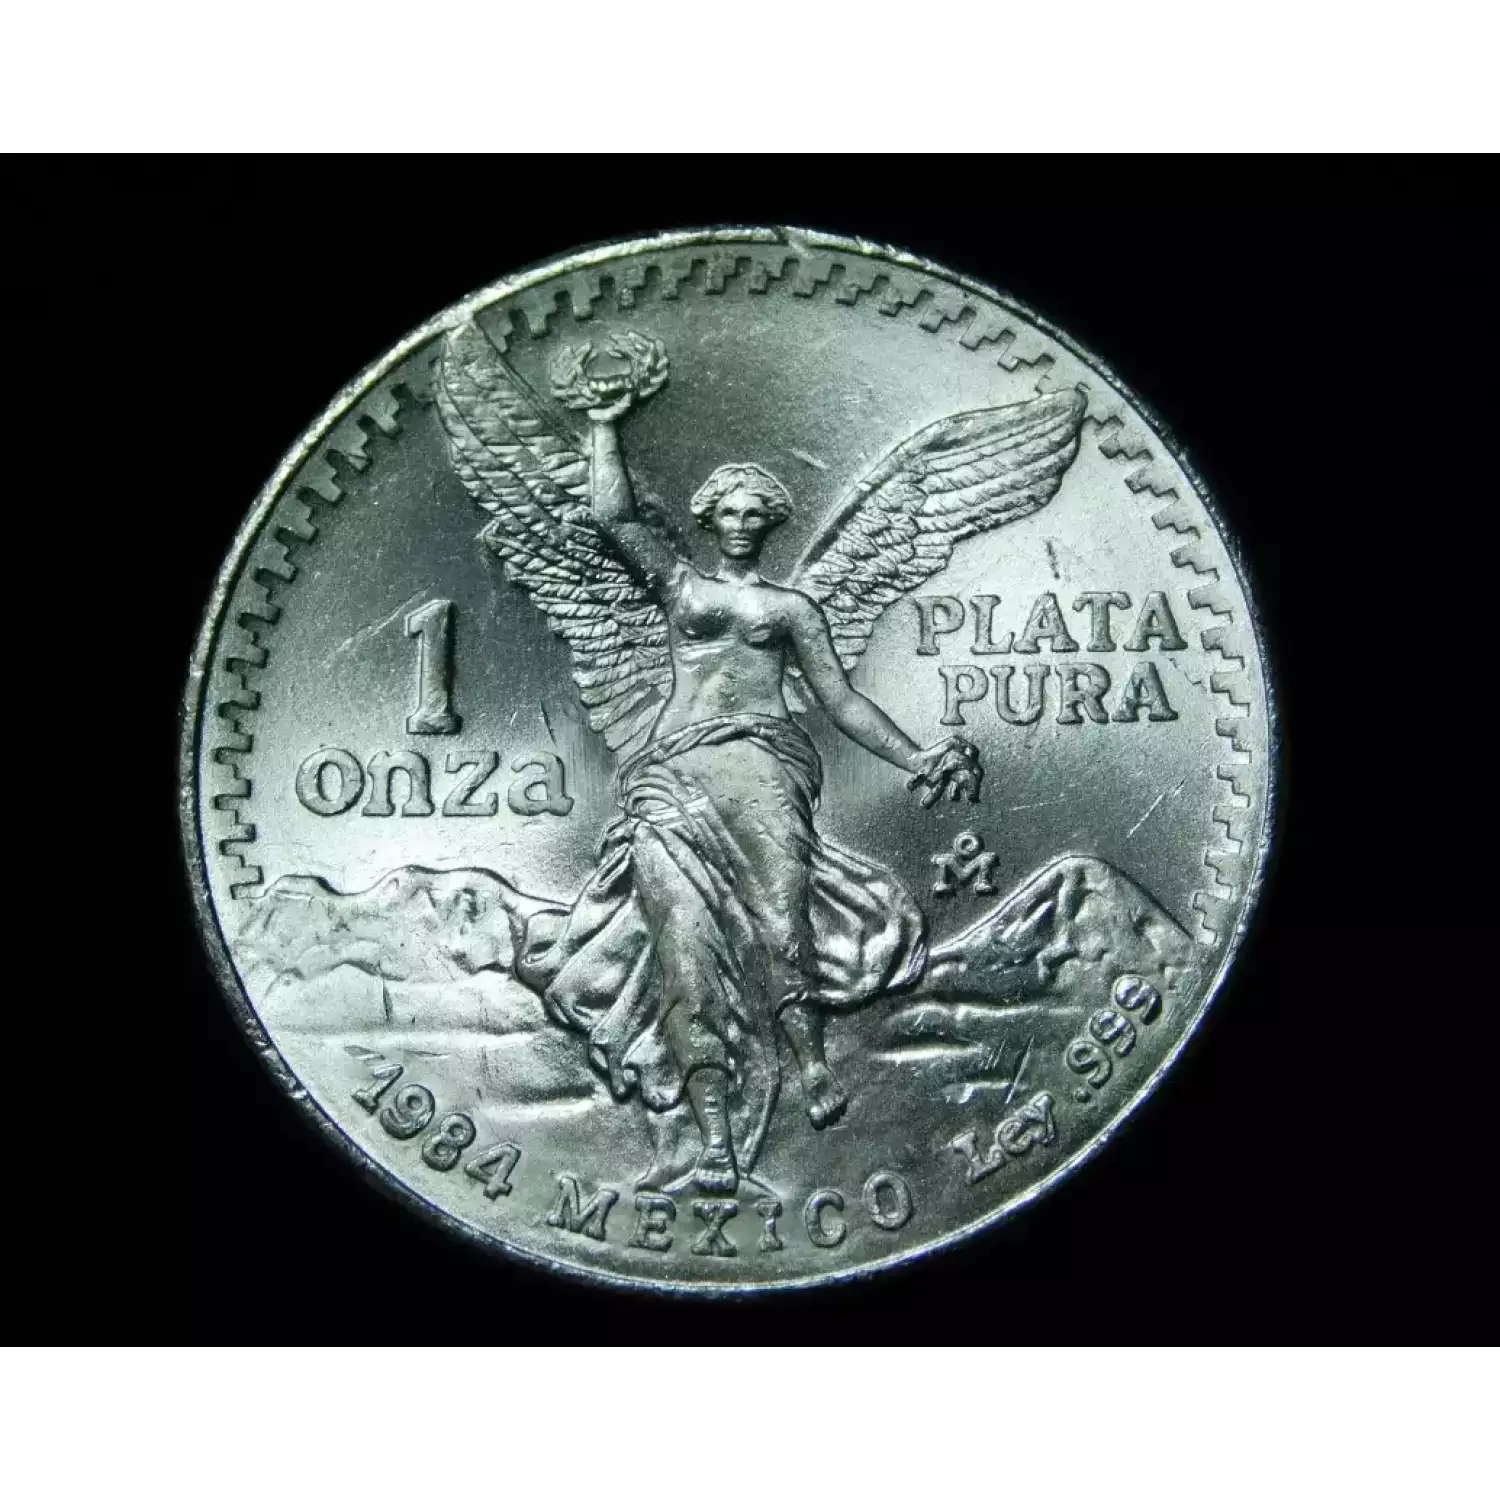 1984 1oz Mexican Silver Onza Libertad [DUPLICATE for #545905] (2)